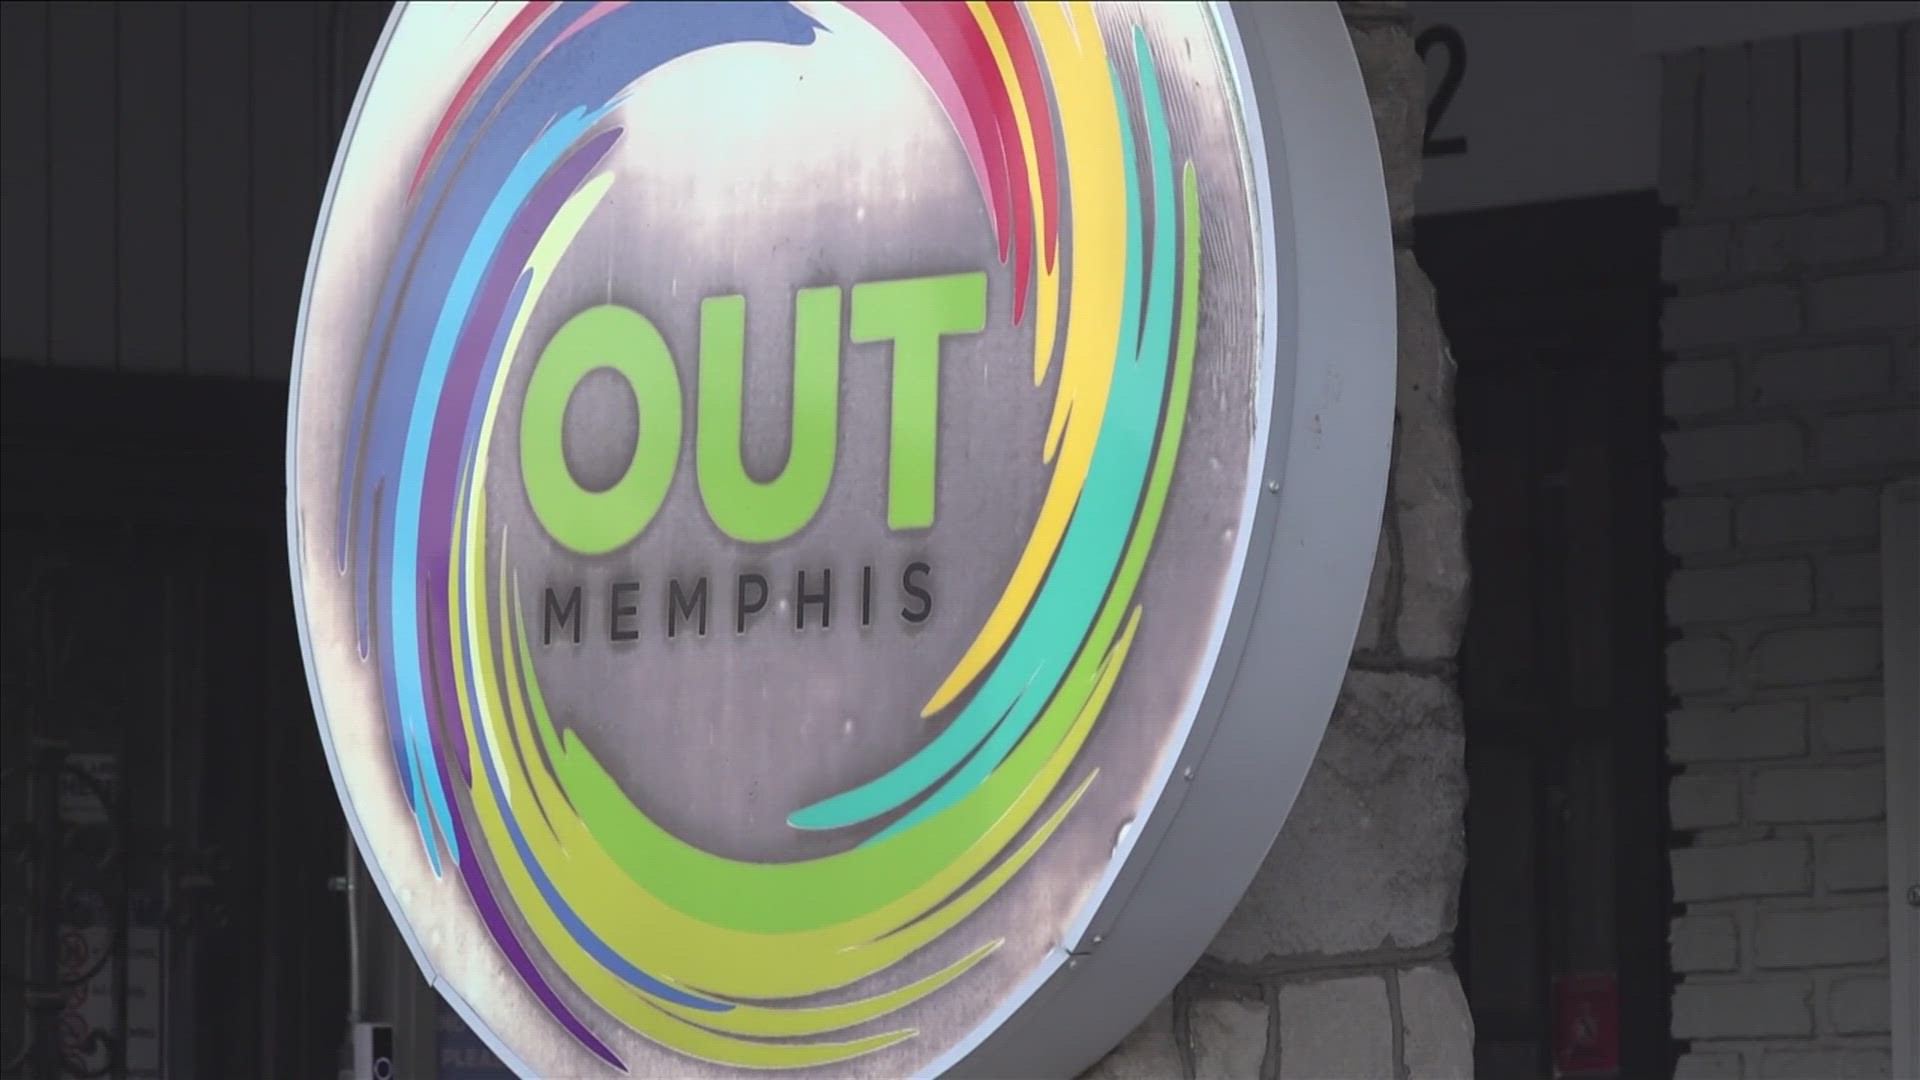 OUTMemphis is part of a new lawsuit filed by the ACLU and the Transgender Law Center against Tennessee over the state’s Aggravated Prostitution statute.